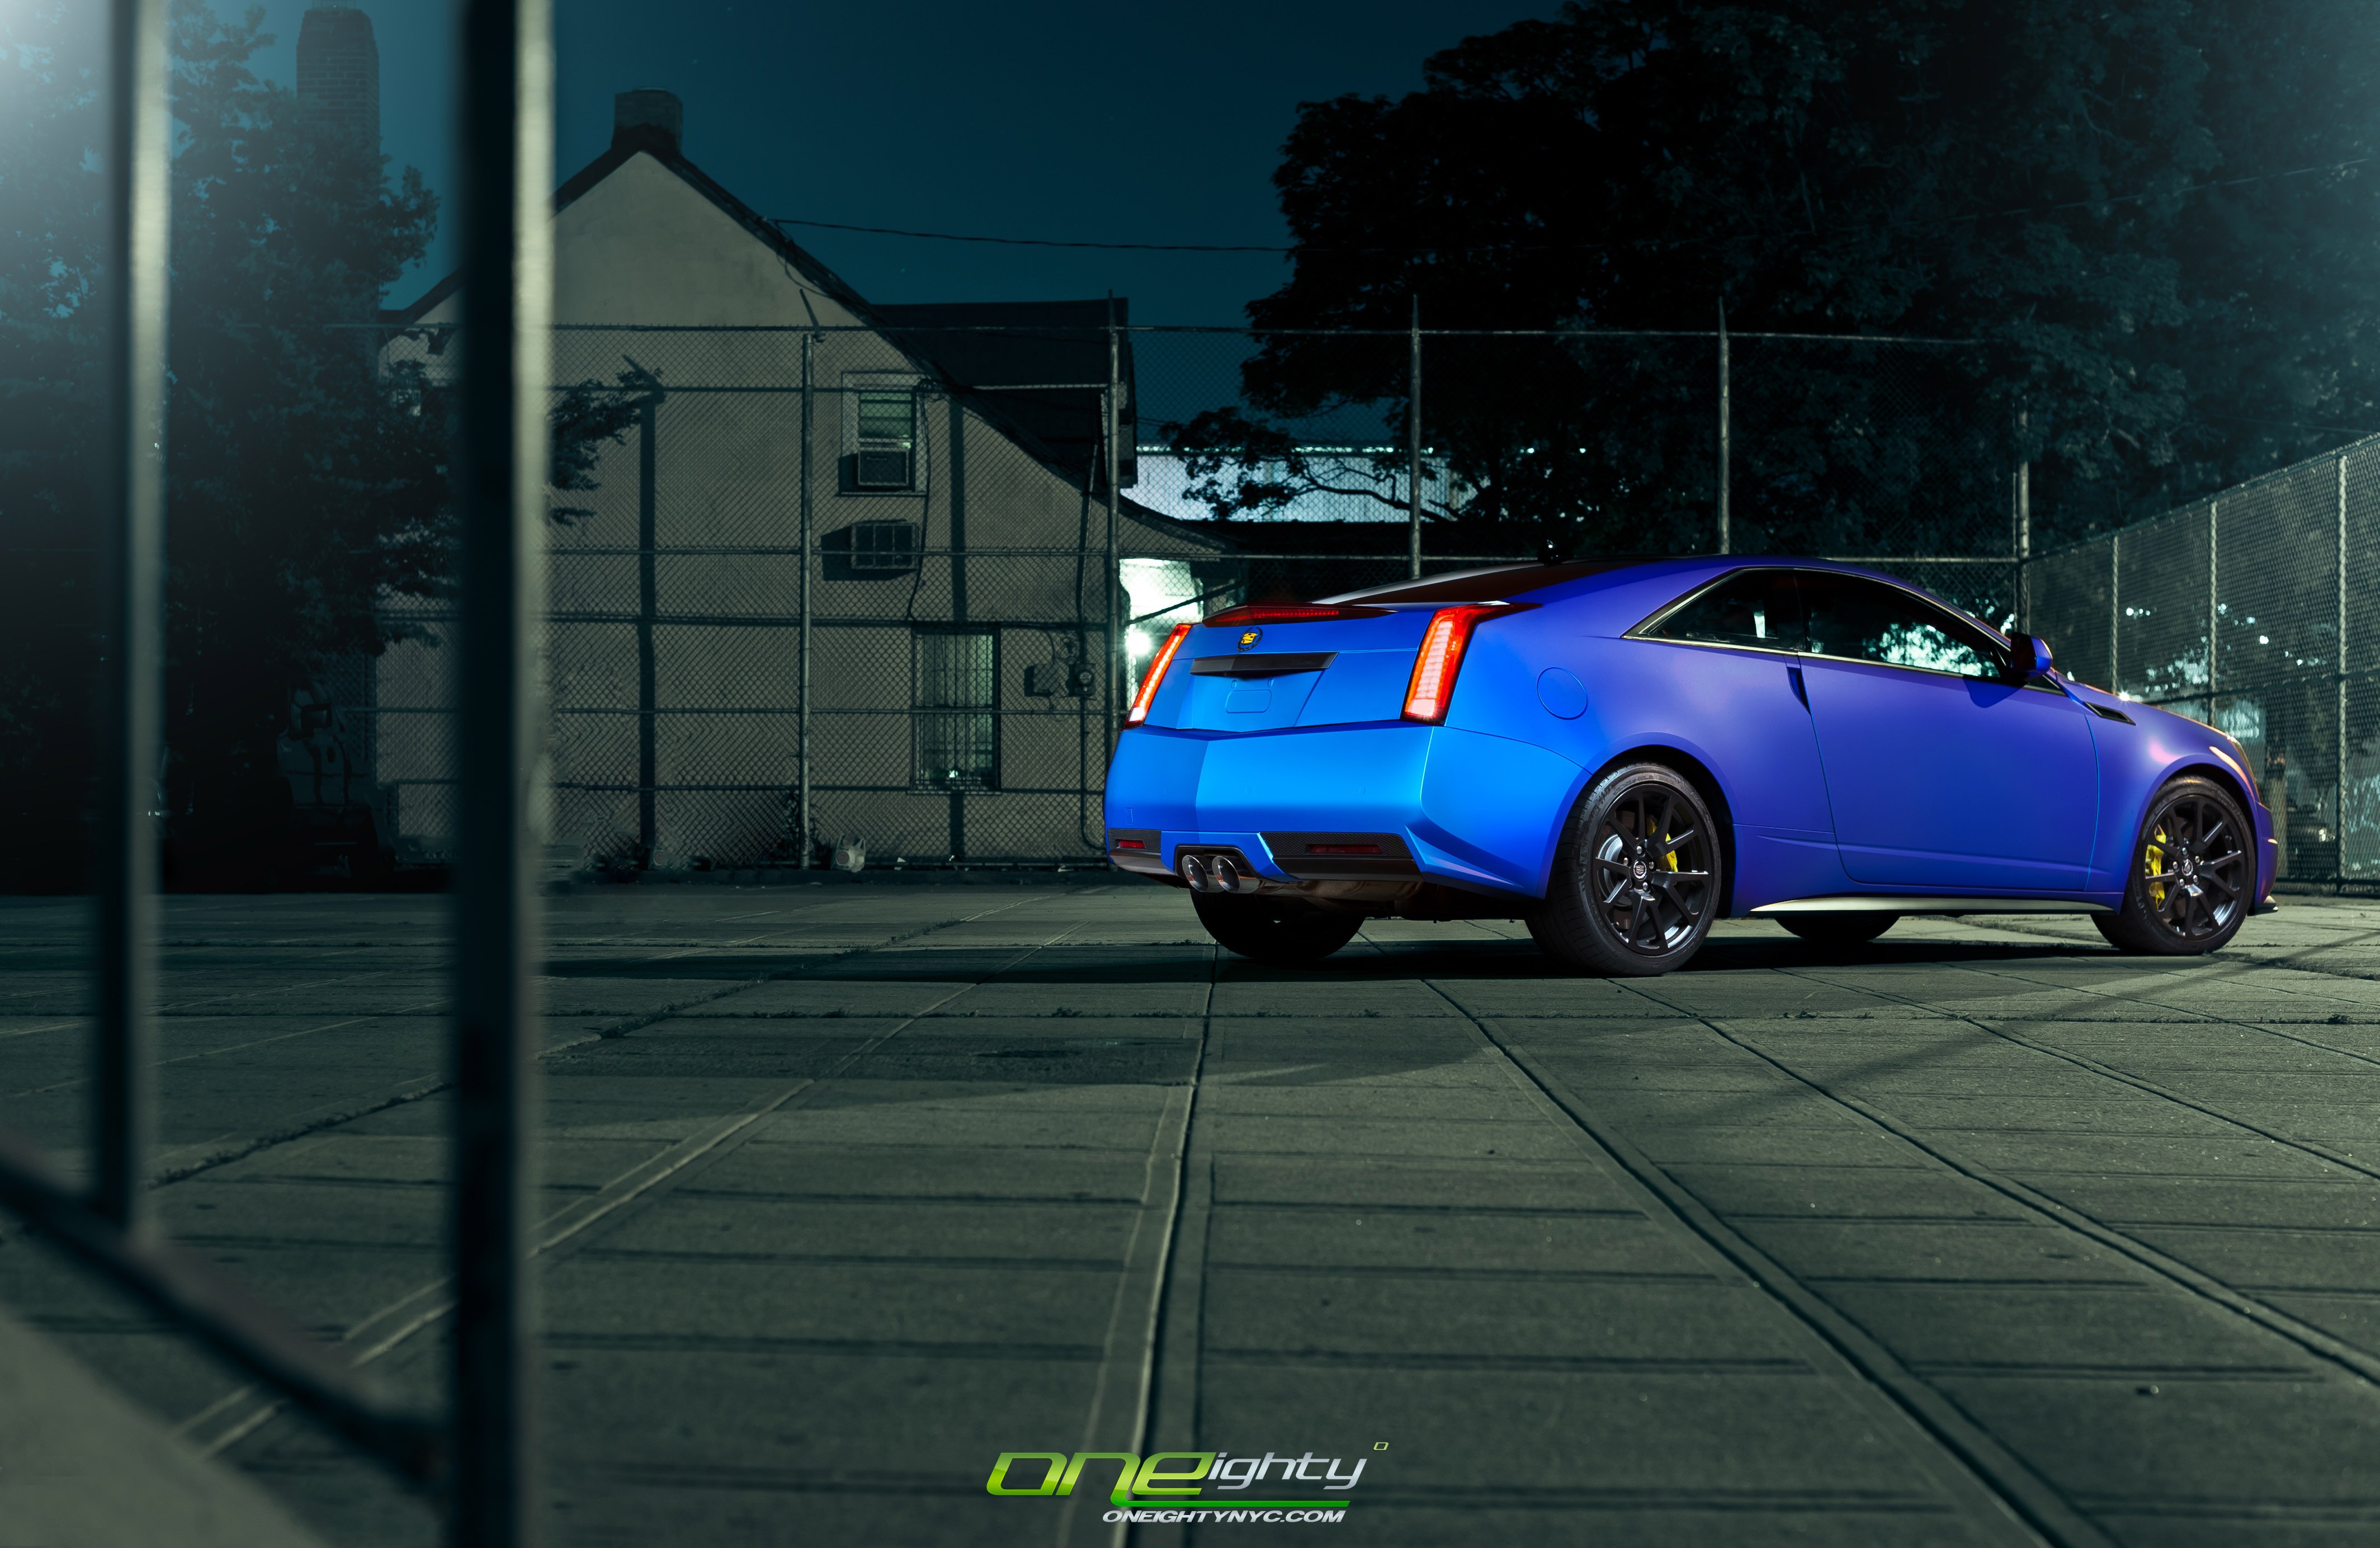 Carbon Fiber Rear Diffuser on Blue Cadillac CTS - Photo by ONEighty NYC